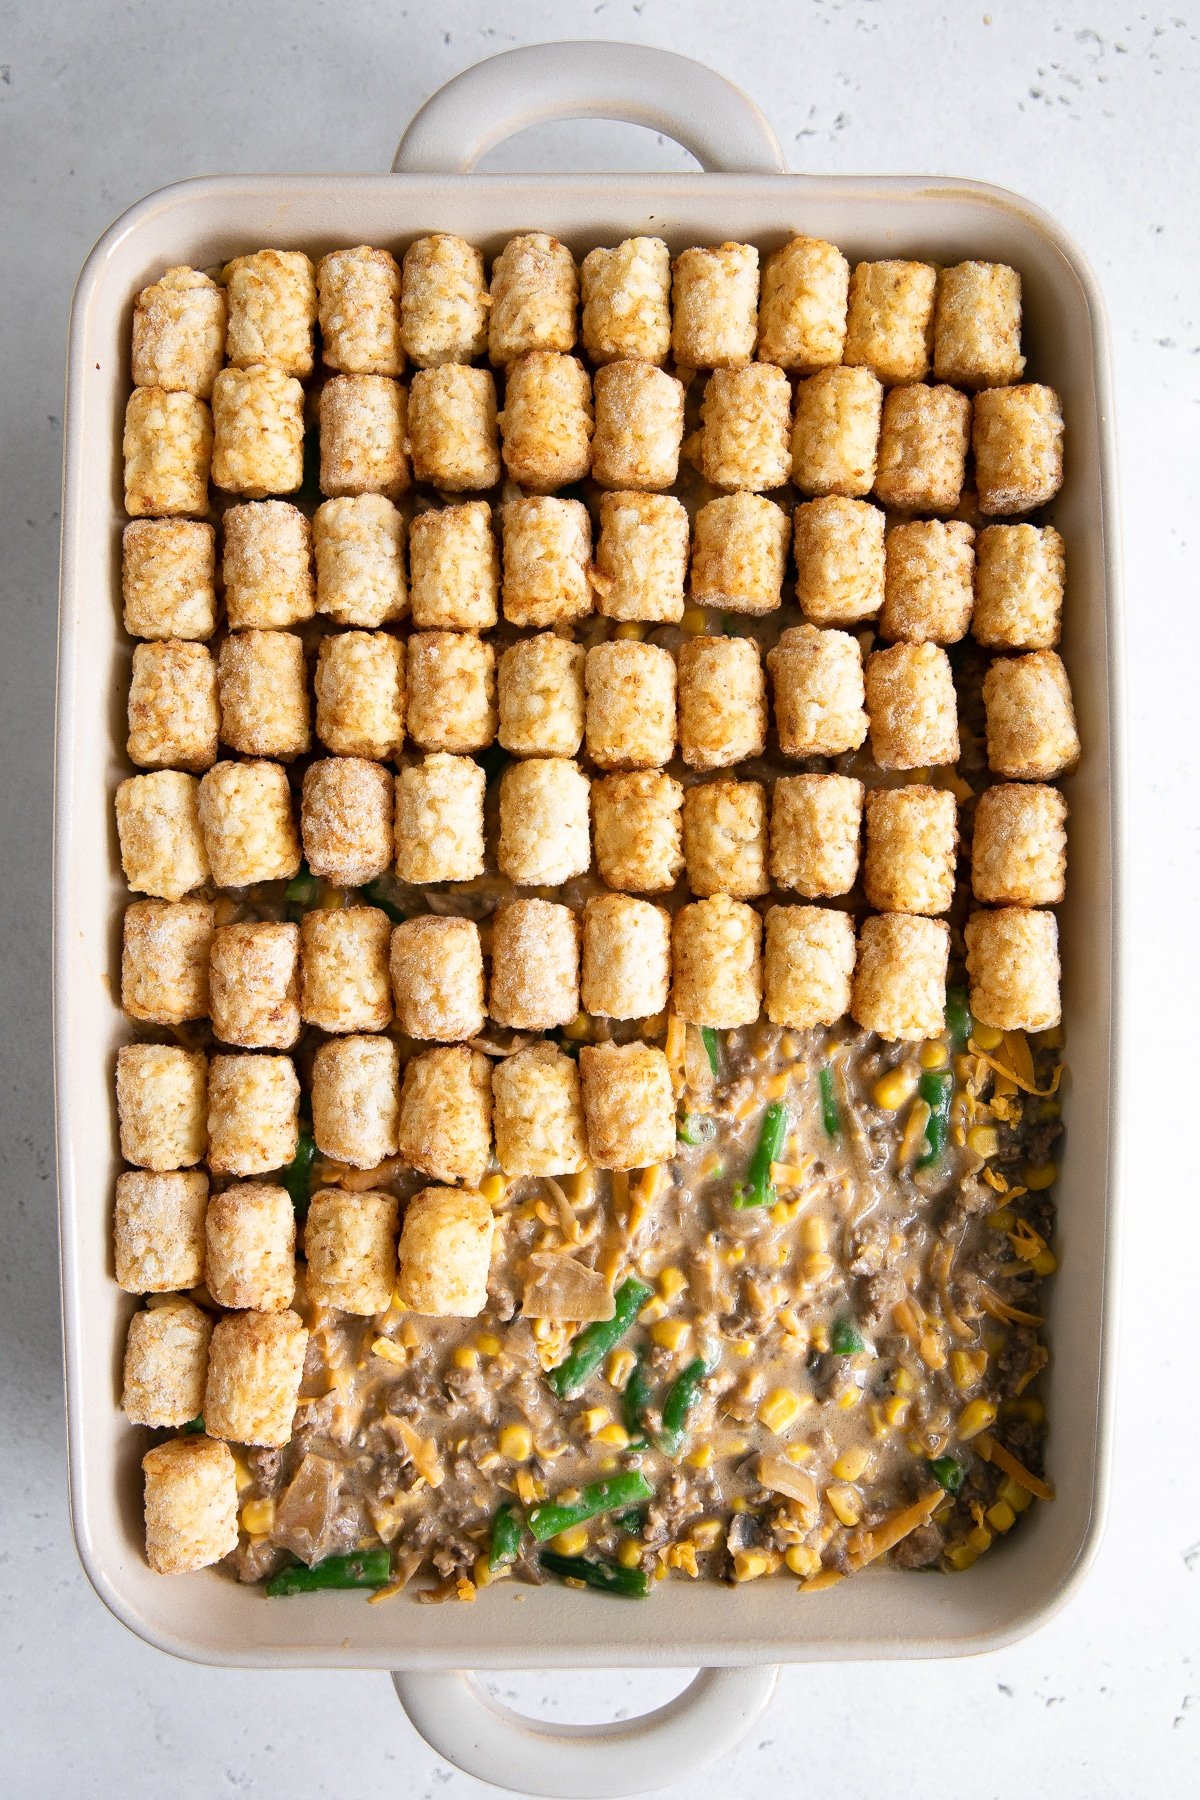 Placing frozen tater tots on top of the tater tot casserole meat mixture.